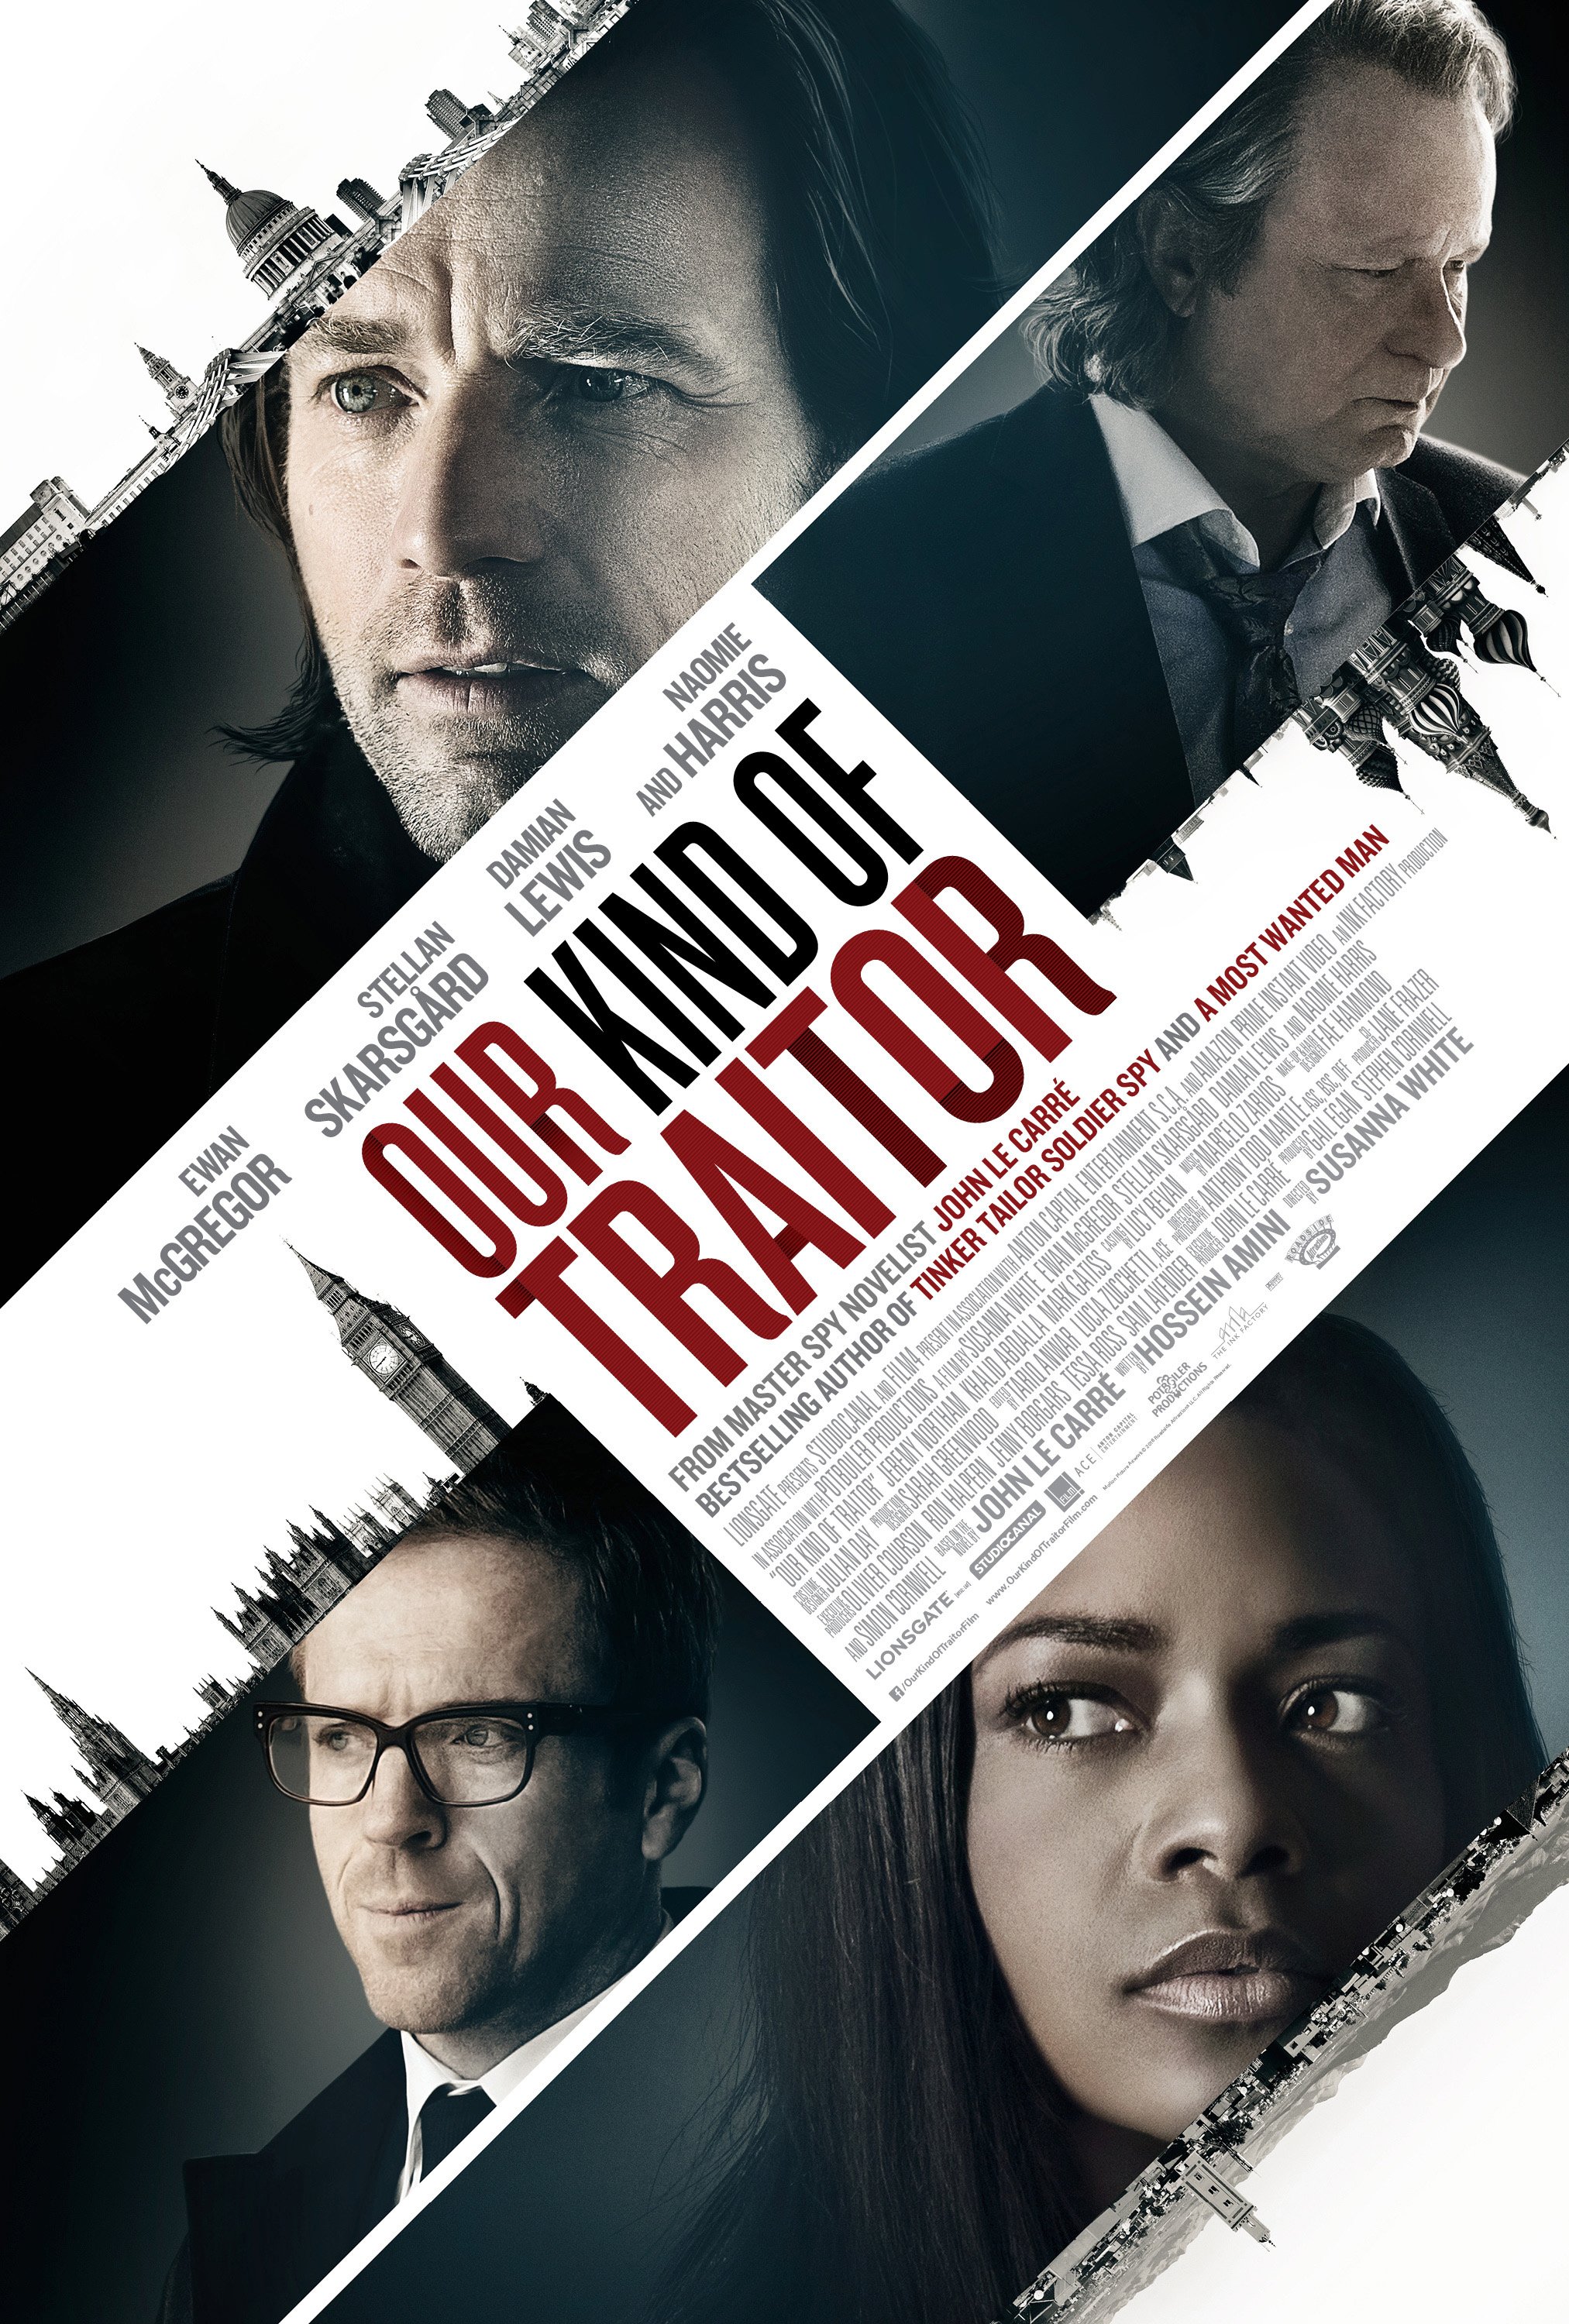 Our-Kind-Of-Traitor-Poster-003.jpg